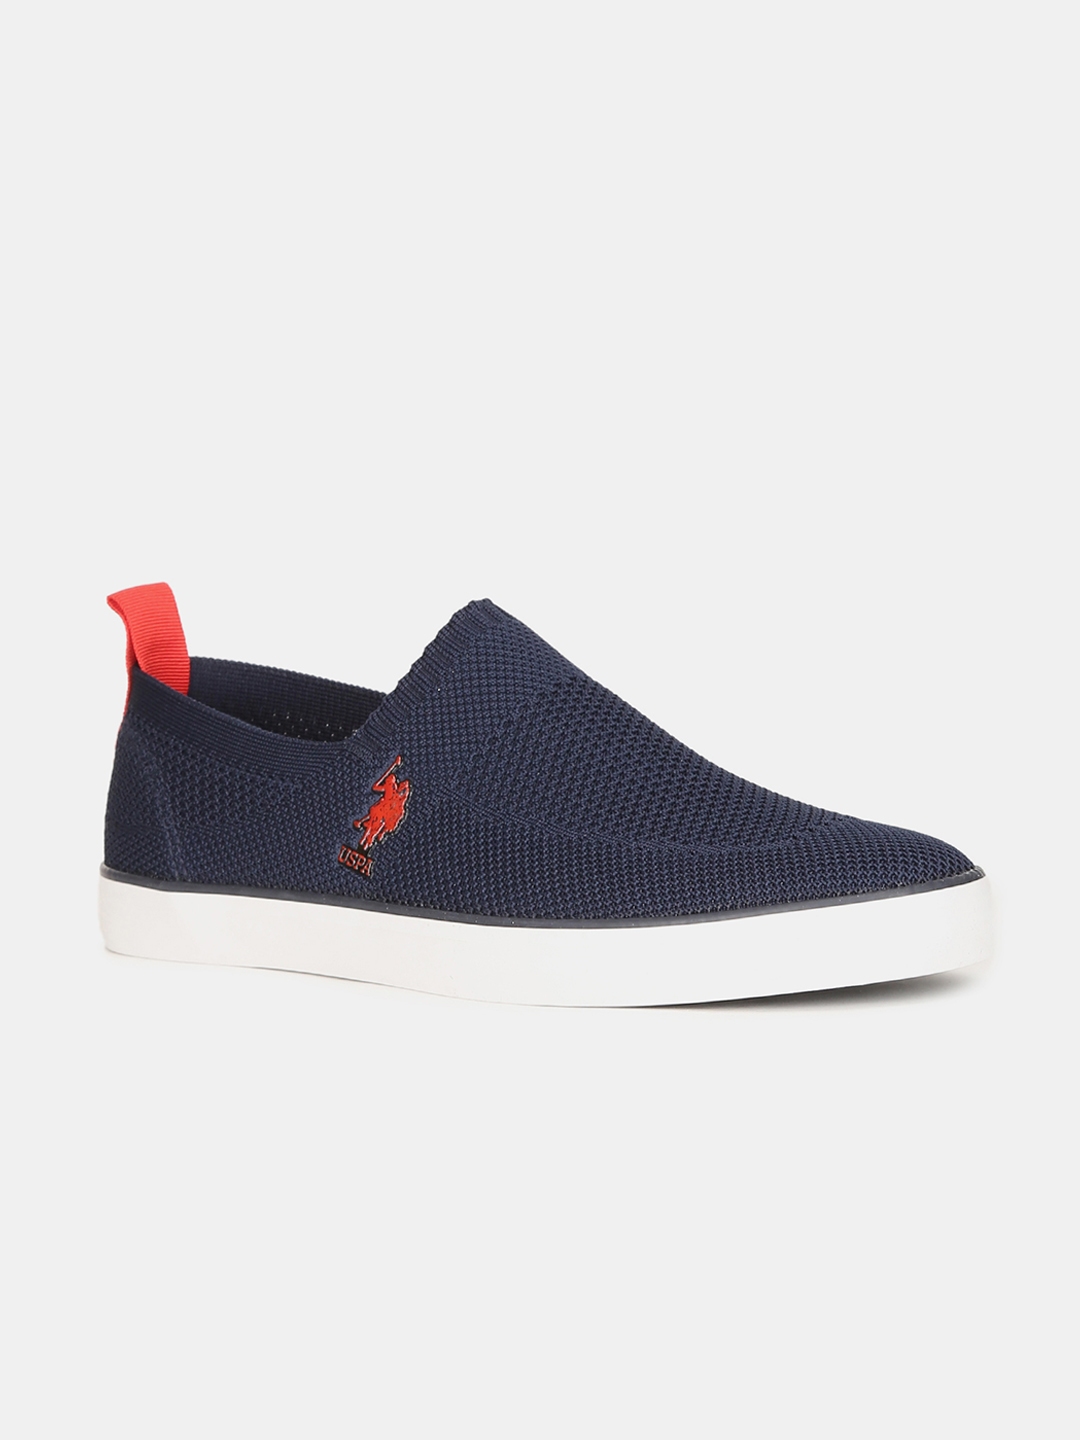 Buy U.S. Polo Assn. Men Blue Slip On Sneakers - Casual Shoes for Men ...